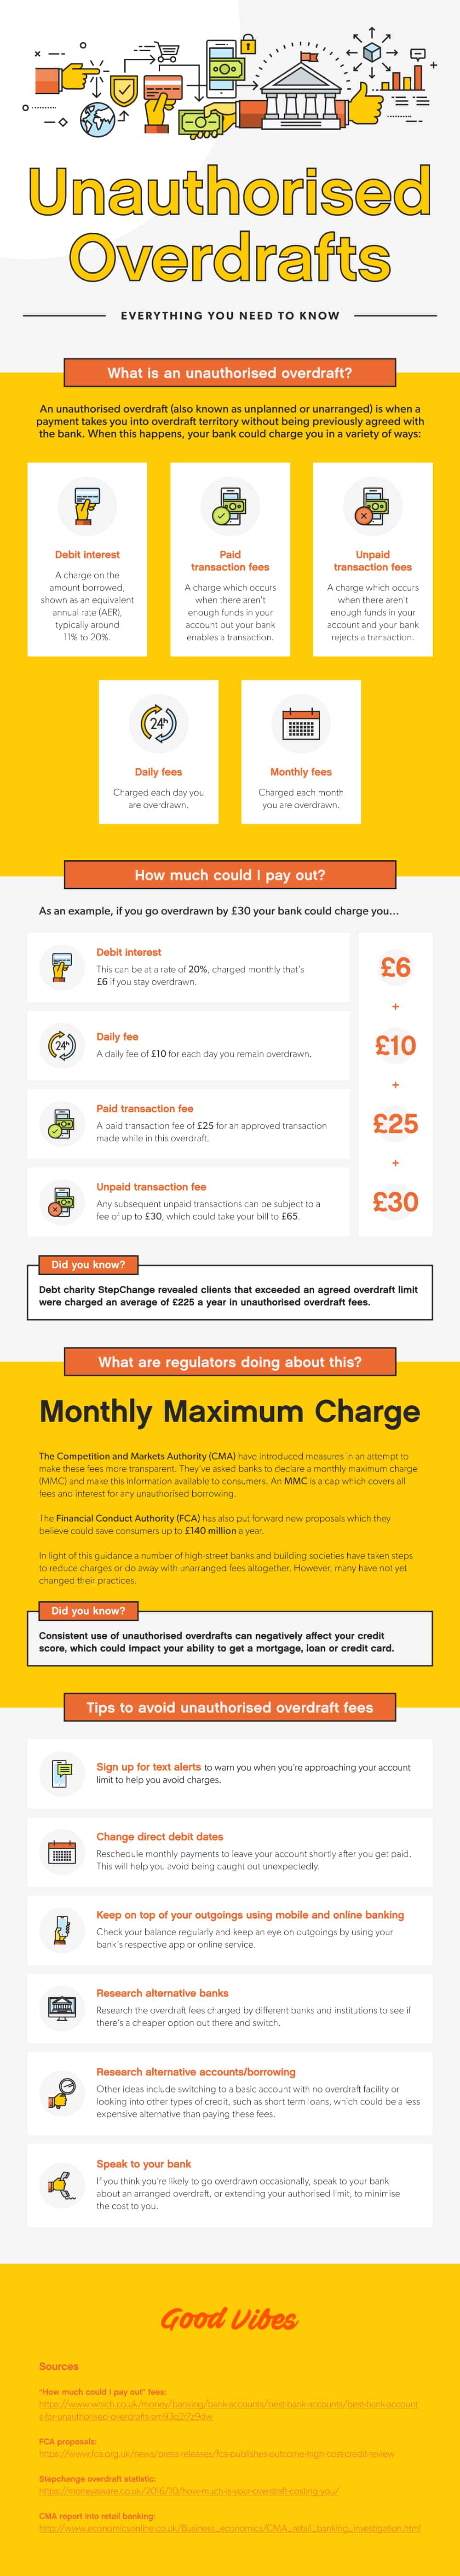 An infographic showing you everything you need to know about unauthorised overdrafts